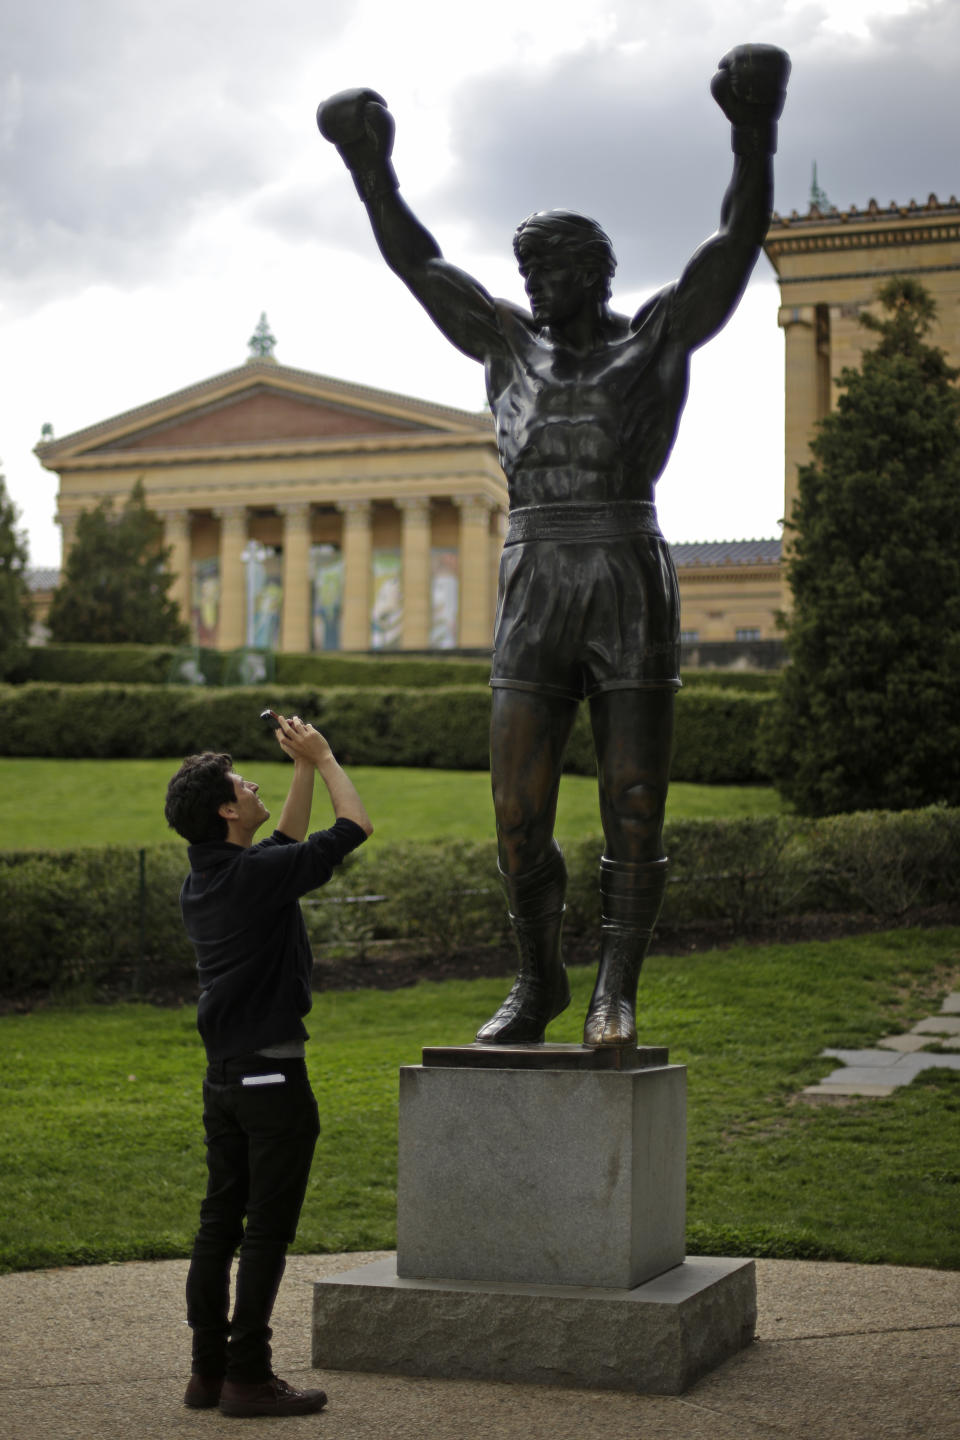 In this Wednesday, May 8, 2013 photo a tourist photographs a bronze Rocky statue outside the Philadelphia Museum in Philadelphia. The City of Brotherly Love is perhaps best known for its Colonial roots but locals will tell you there's much more to explore in this city of 1.5 million people. (AP Photo/Matt Rourke, File)